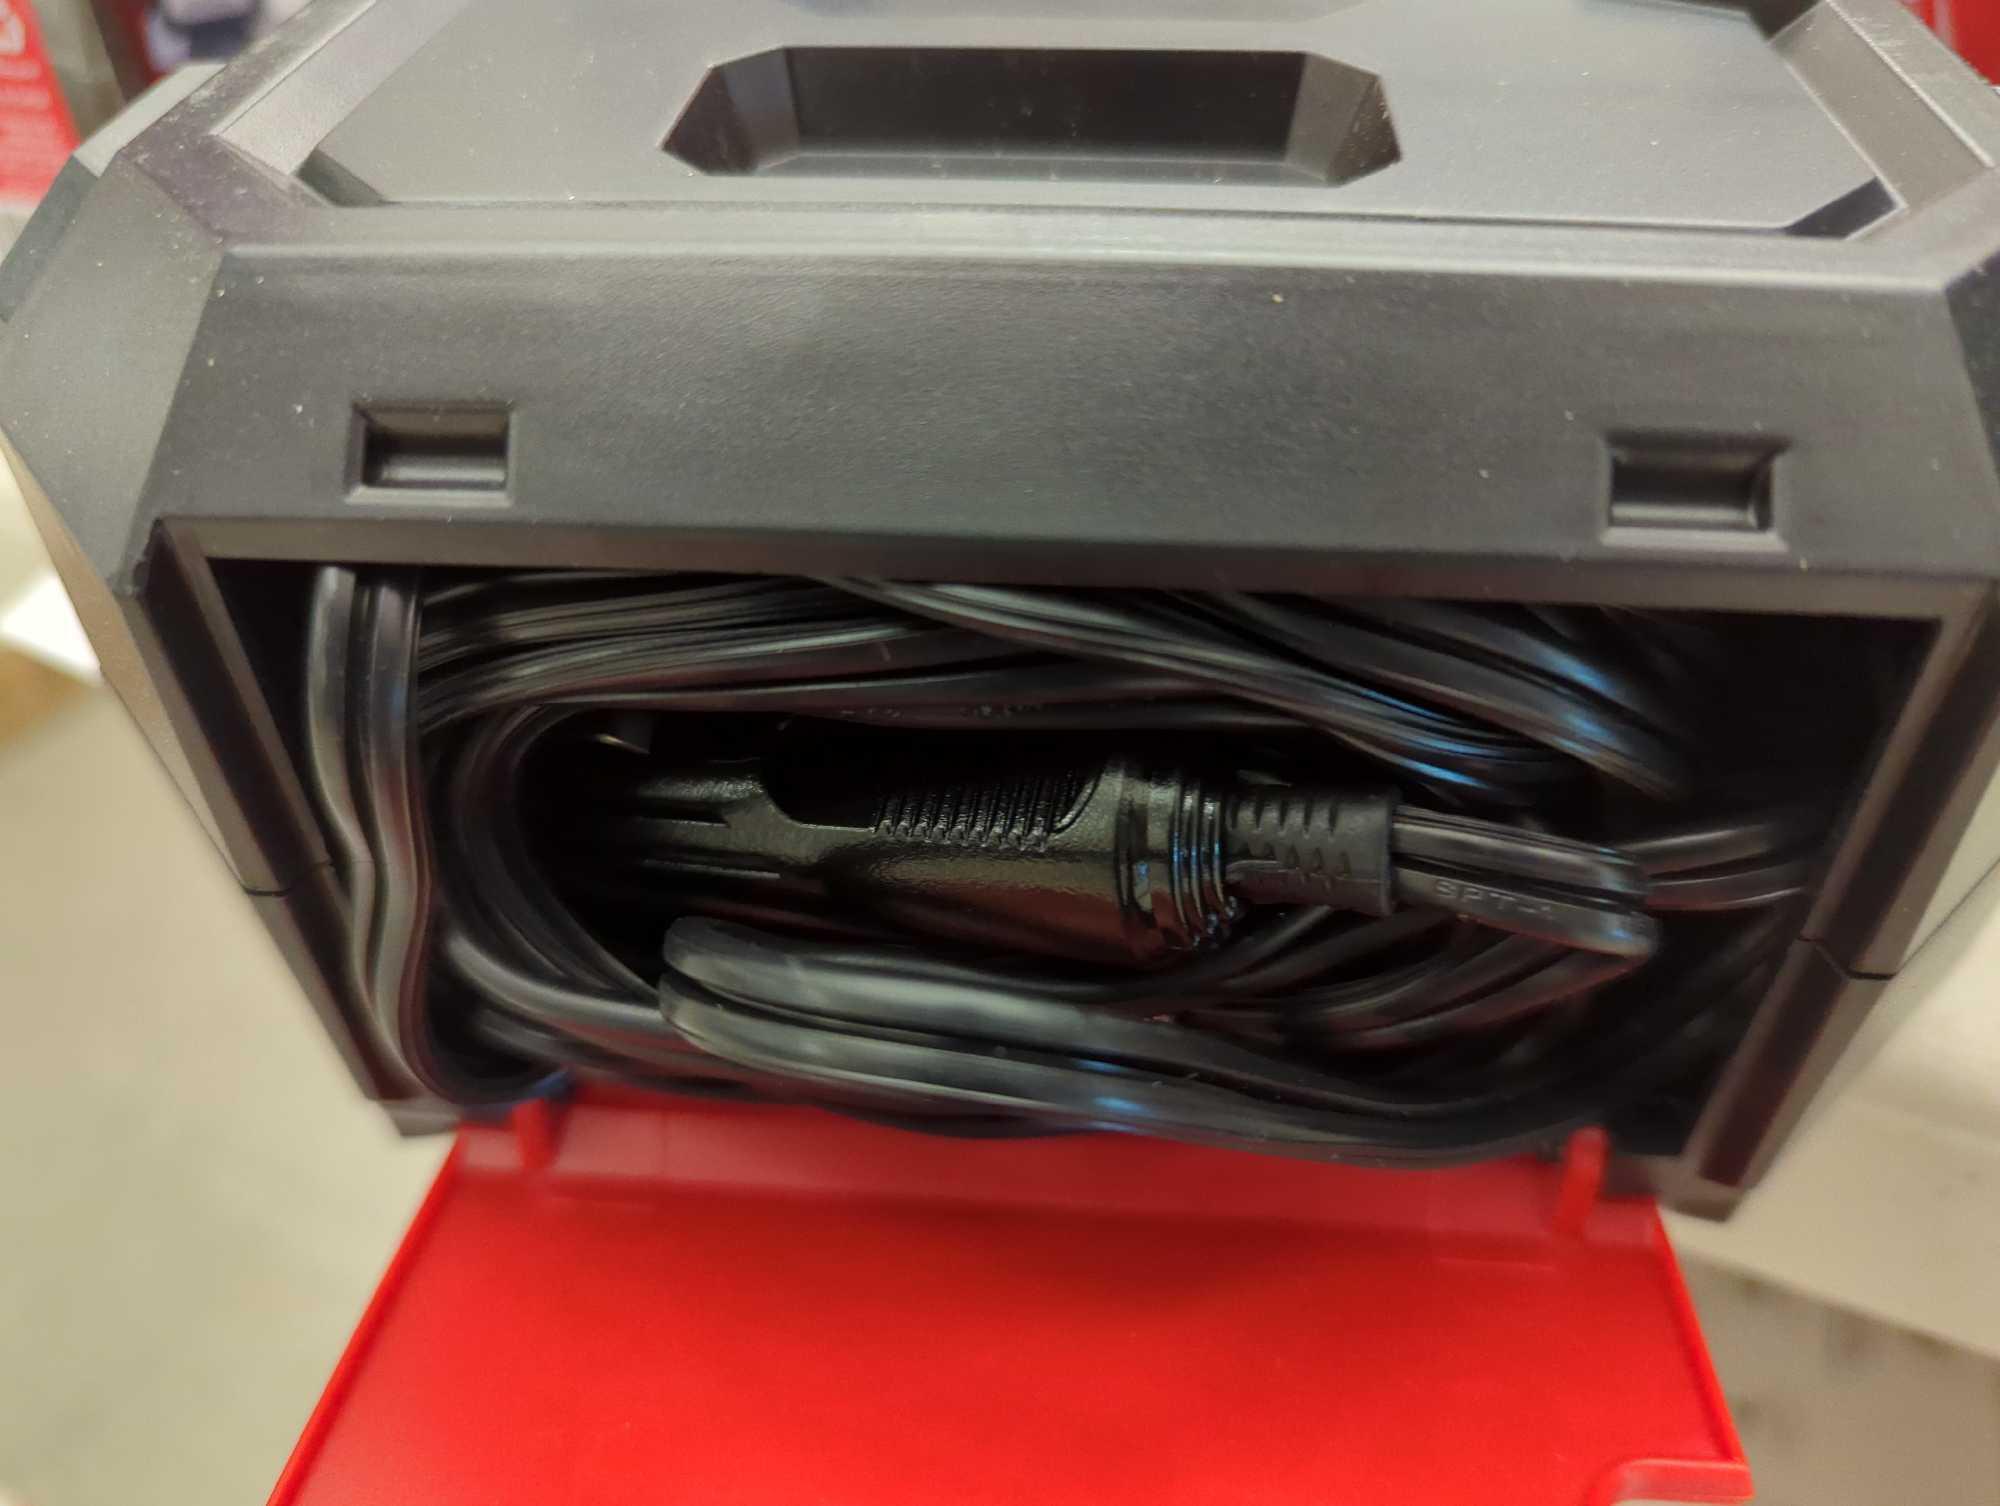 Husky 12-Volt Inflator, Appears to be New in Open Box Do to Being In Open Box Some Pieces May Be